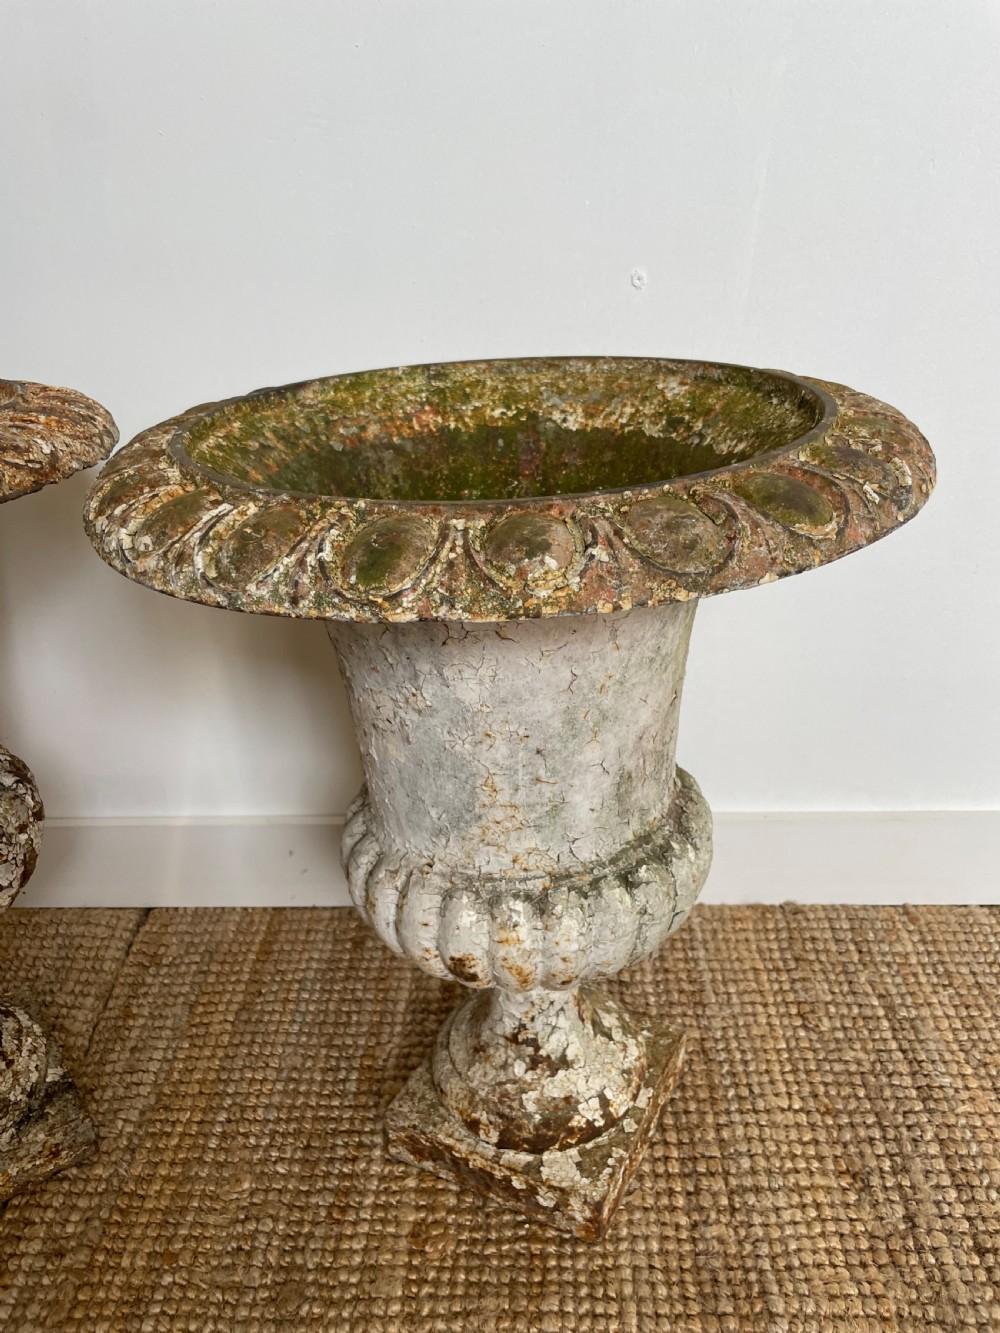 Great pair of late 19th century cast iron campana shaped garden urns
Height 22 inches
Diameter 18 inches
